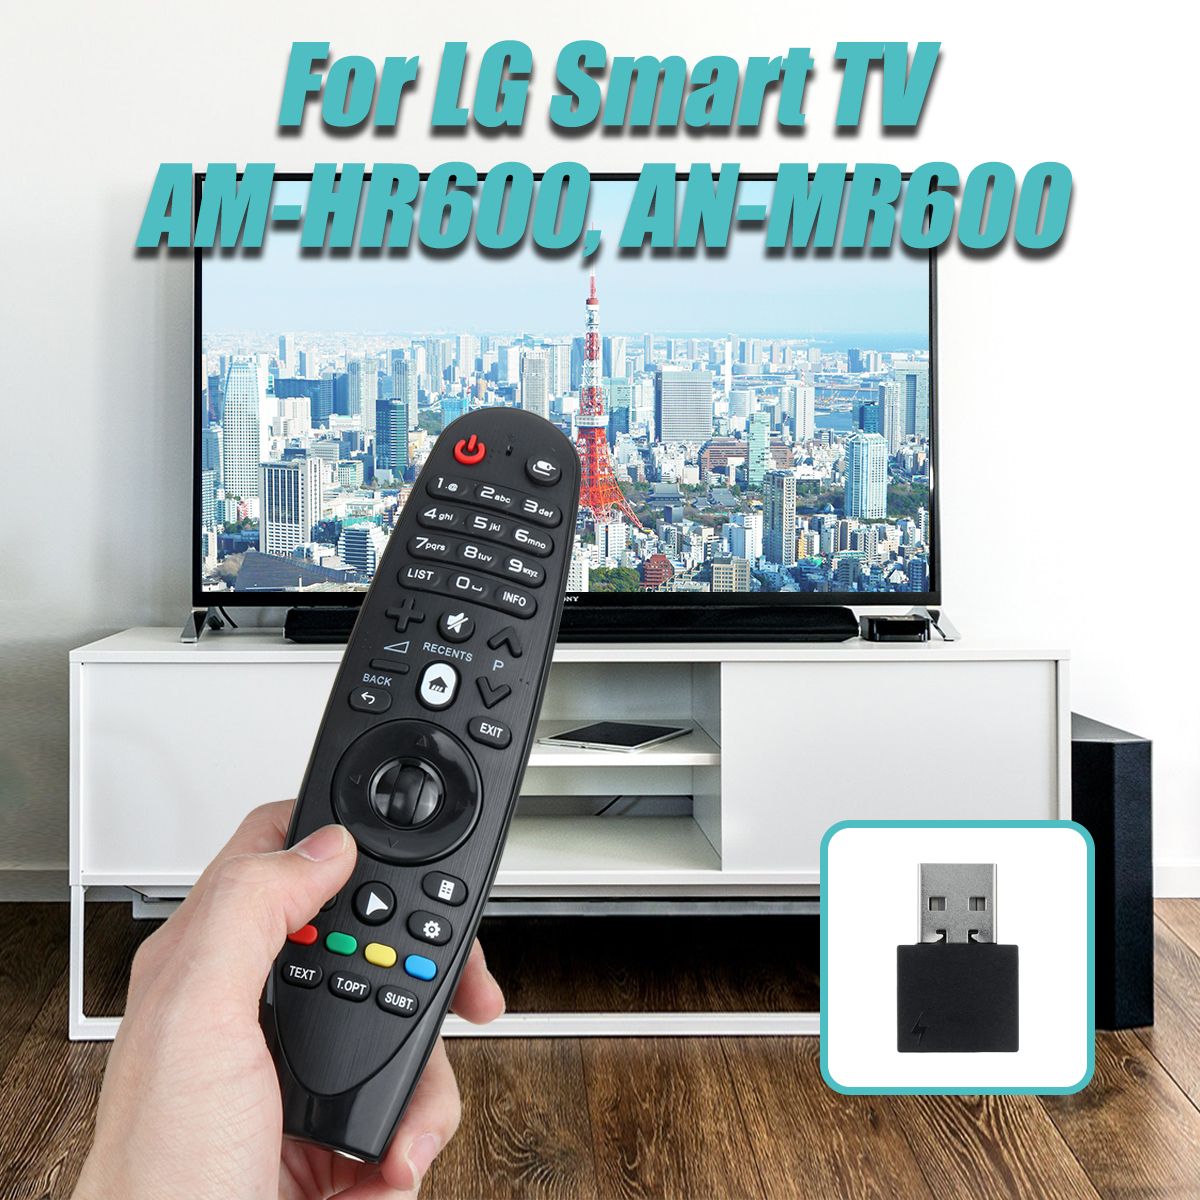 E23890-Replacement-Remote-Control-For-LG-Smart-TV-AM-HR600-AN-MR600-1649296